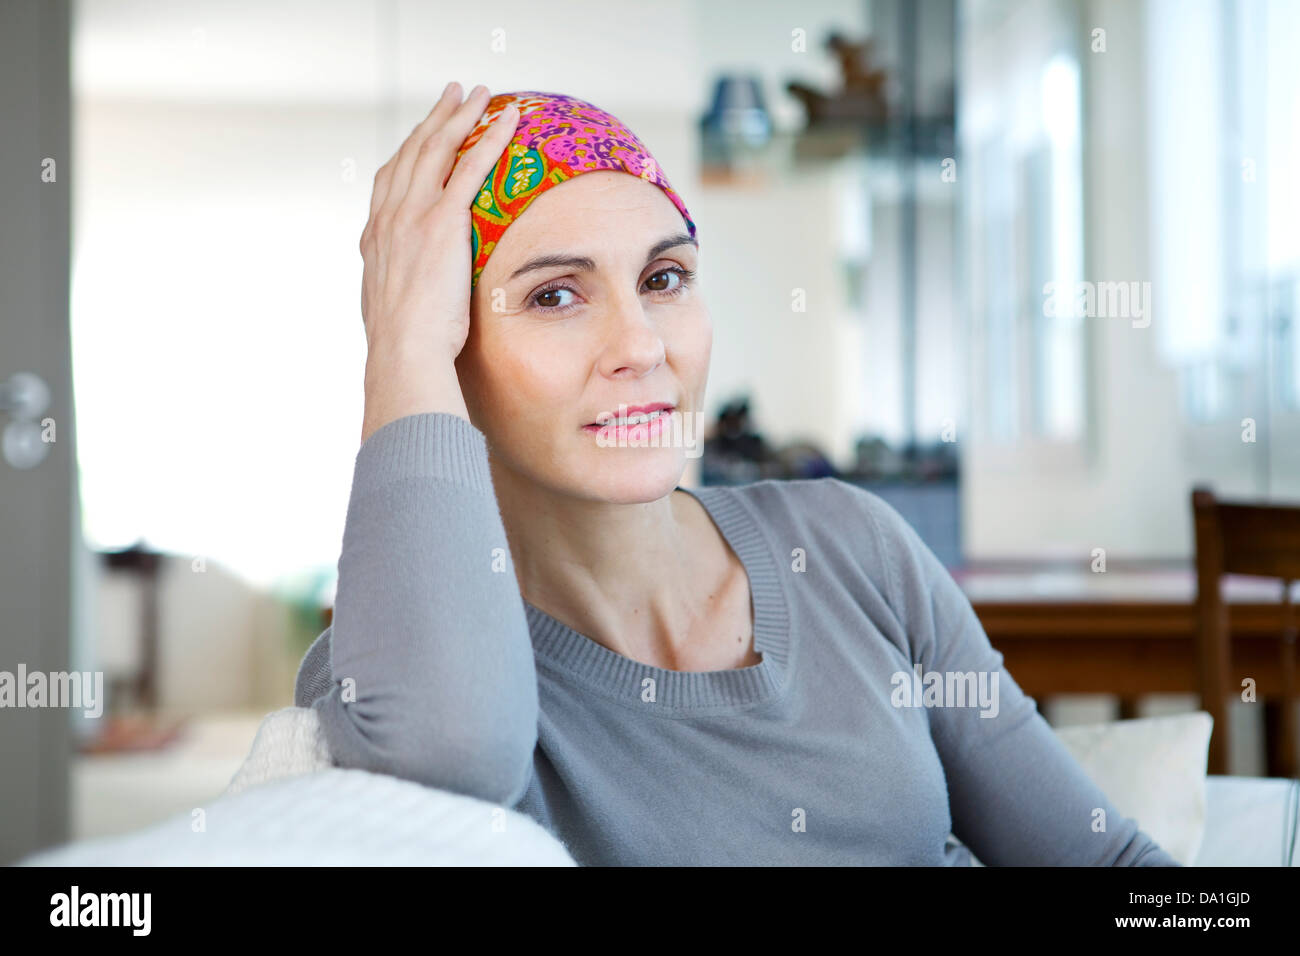 CANCER, WOMAN Stock Photo